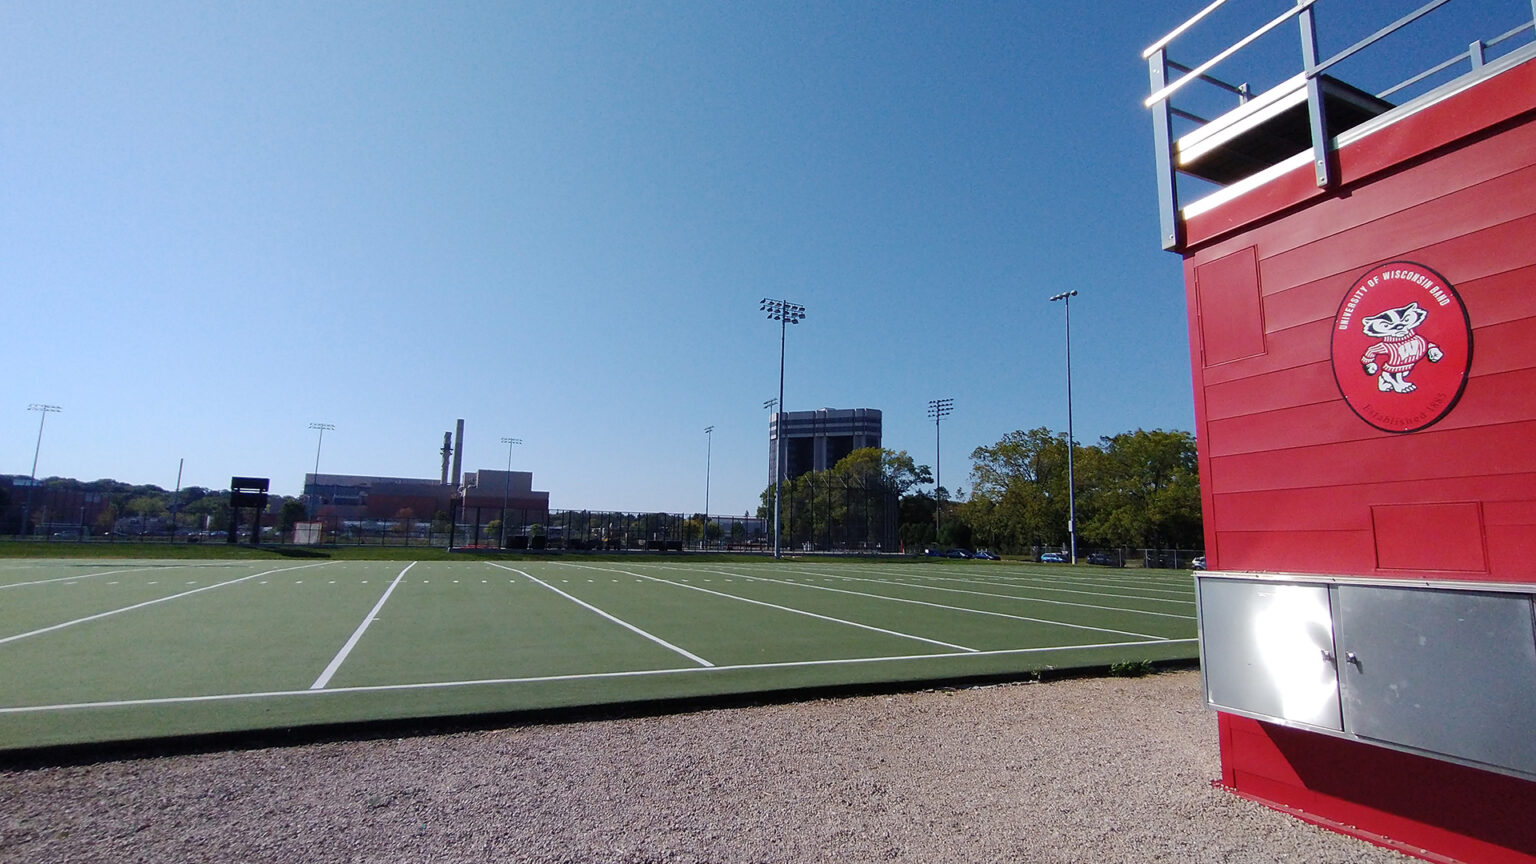 A red conductor's podium overlooks the green turf of the UW Marching Band's practice field on the UW-Madison campus.